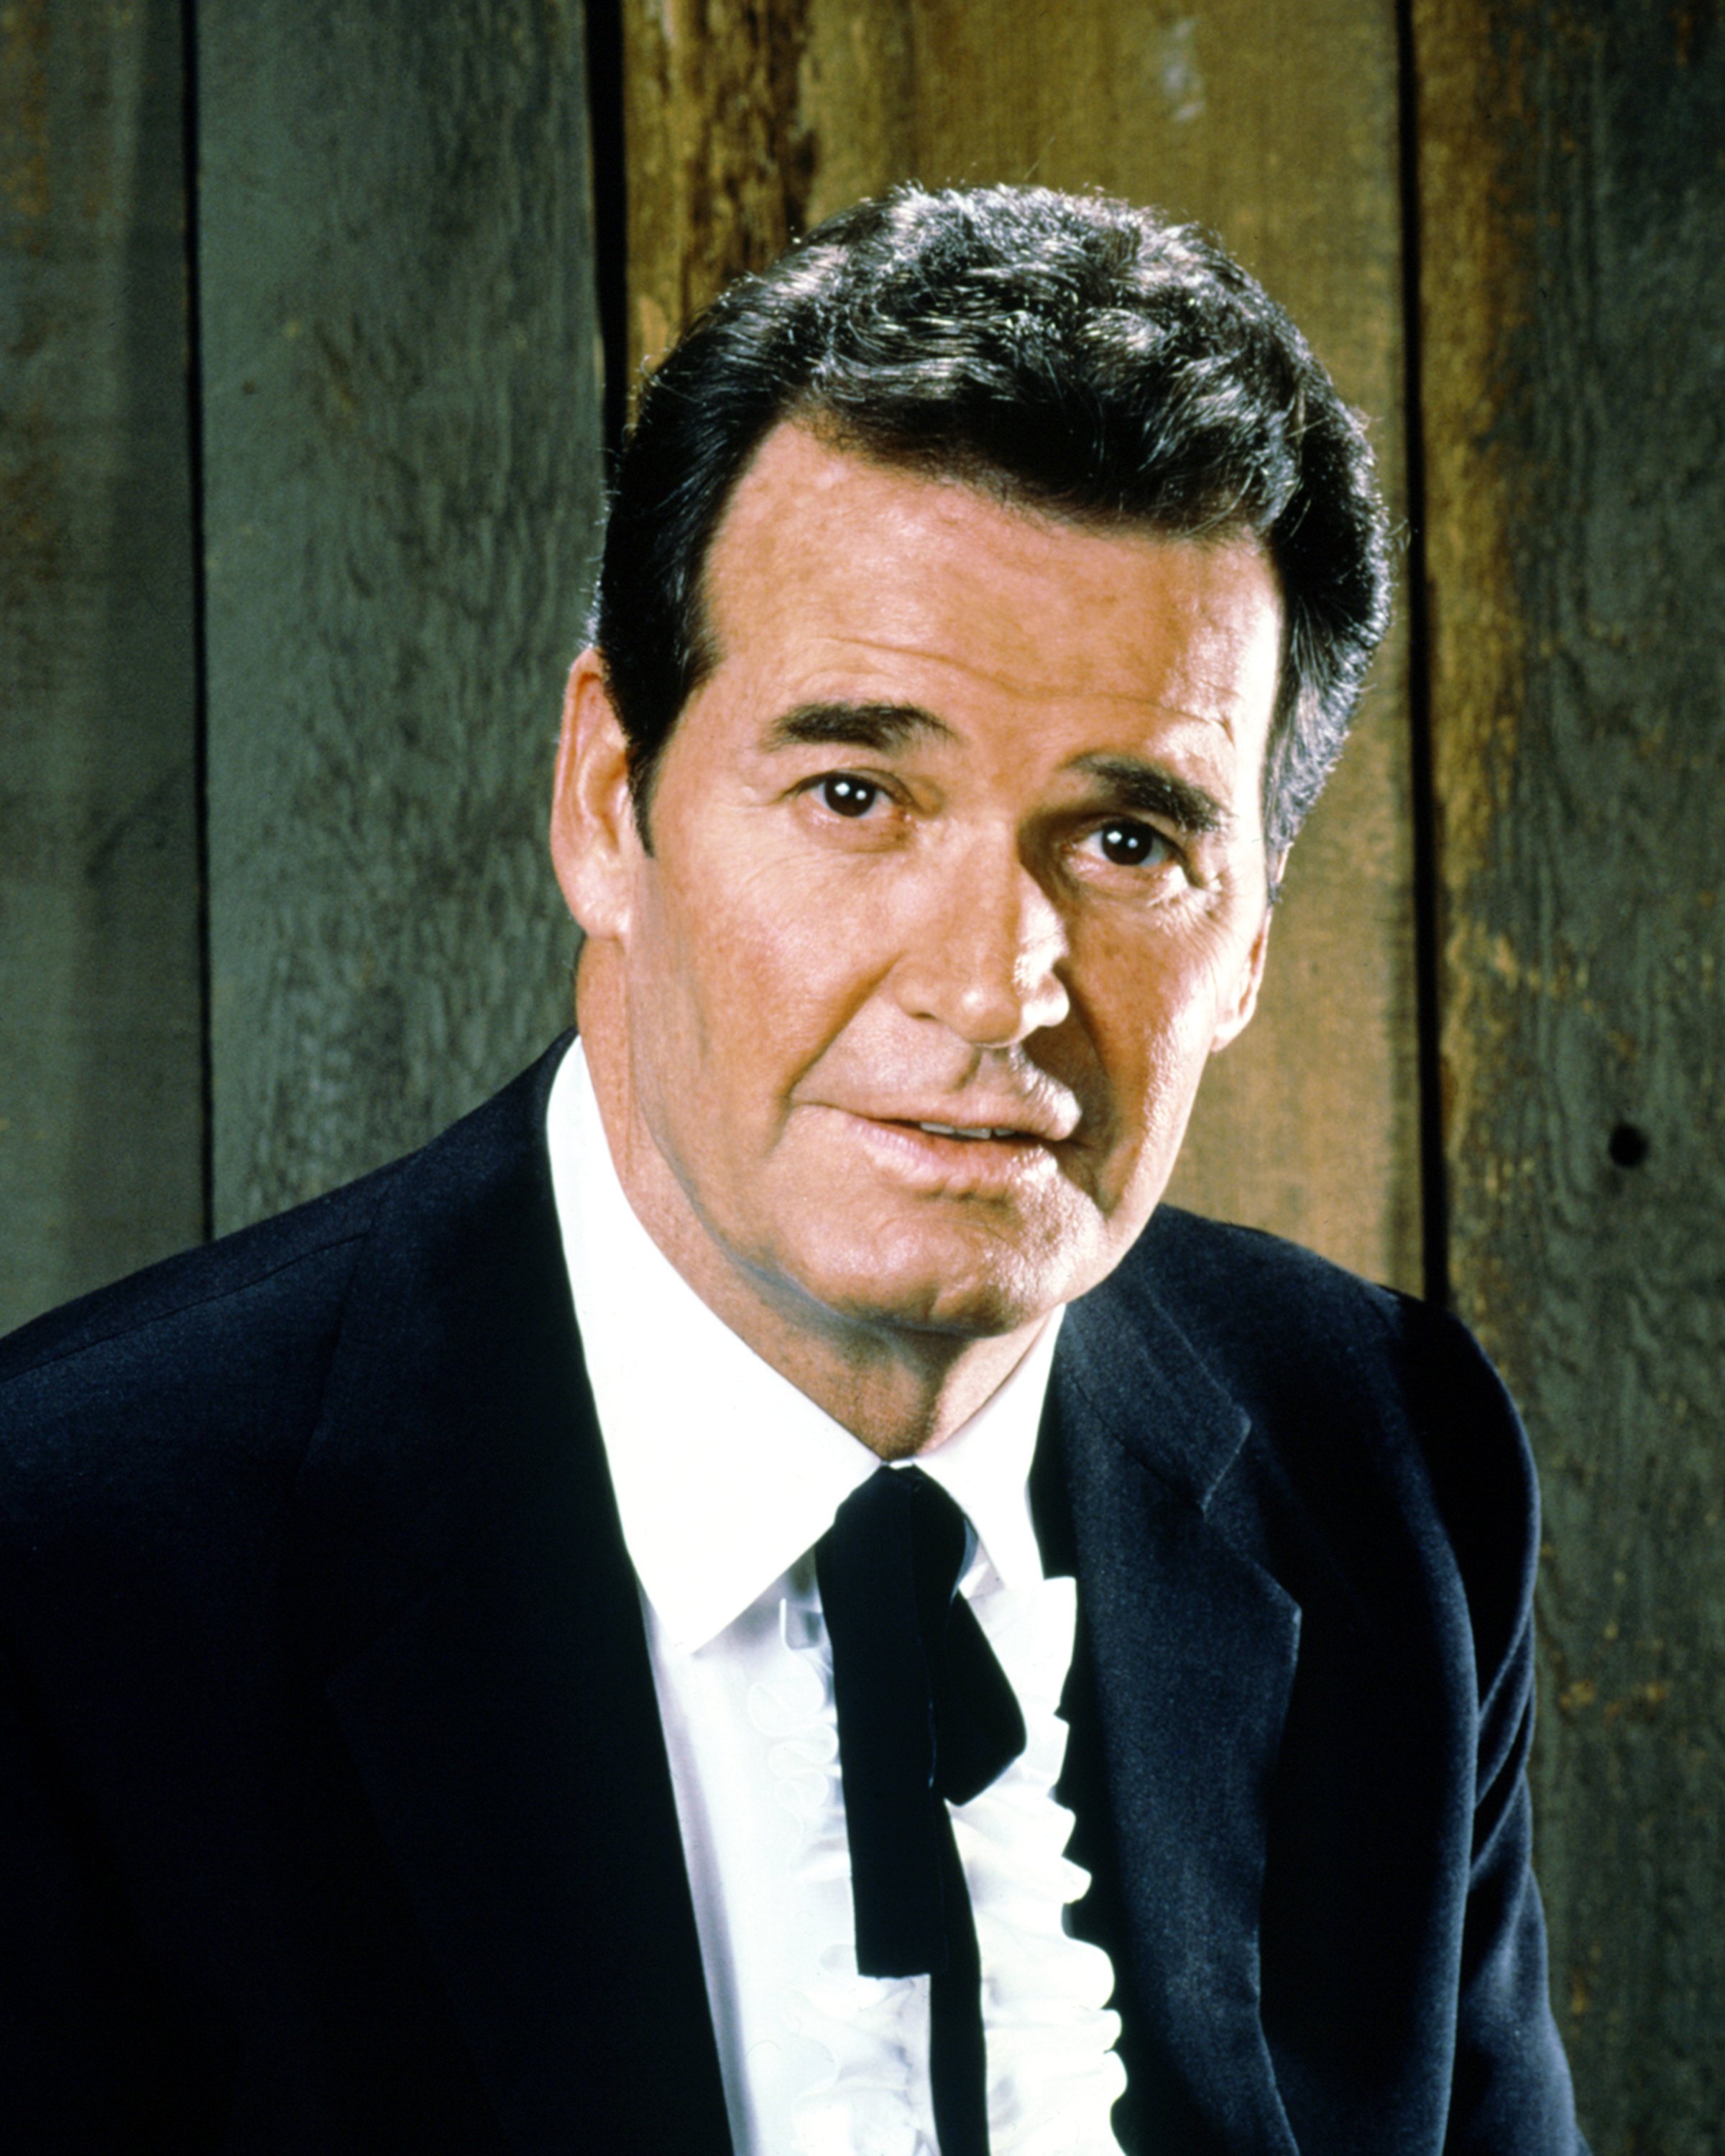 James Garner, US actor, poses in costume in a publicity portrait issued for the US television show, 'Maverick,' USA, circa 1970. The western series starred Garner as 'Bret Maverick.' | Source: Getty Images